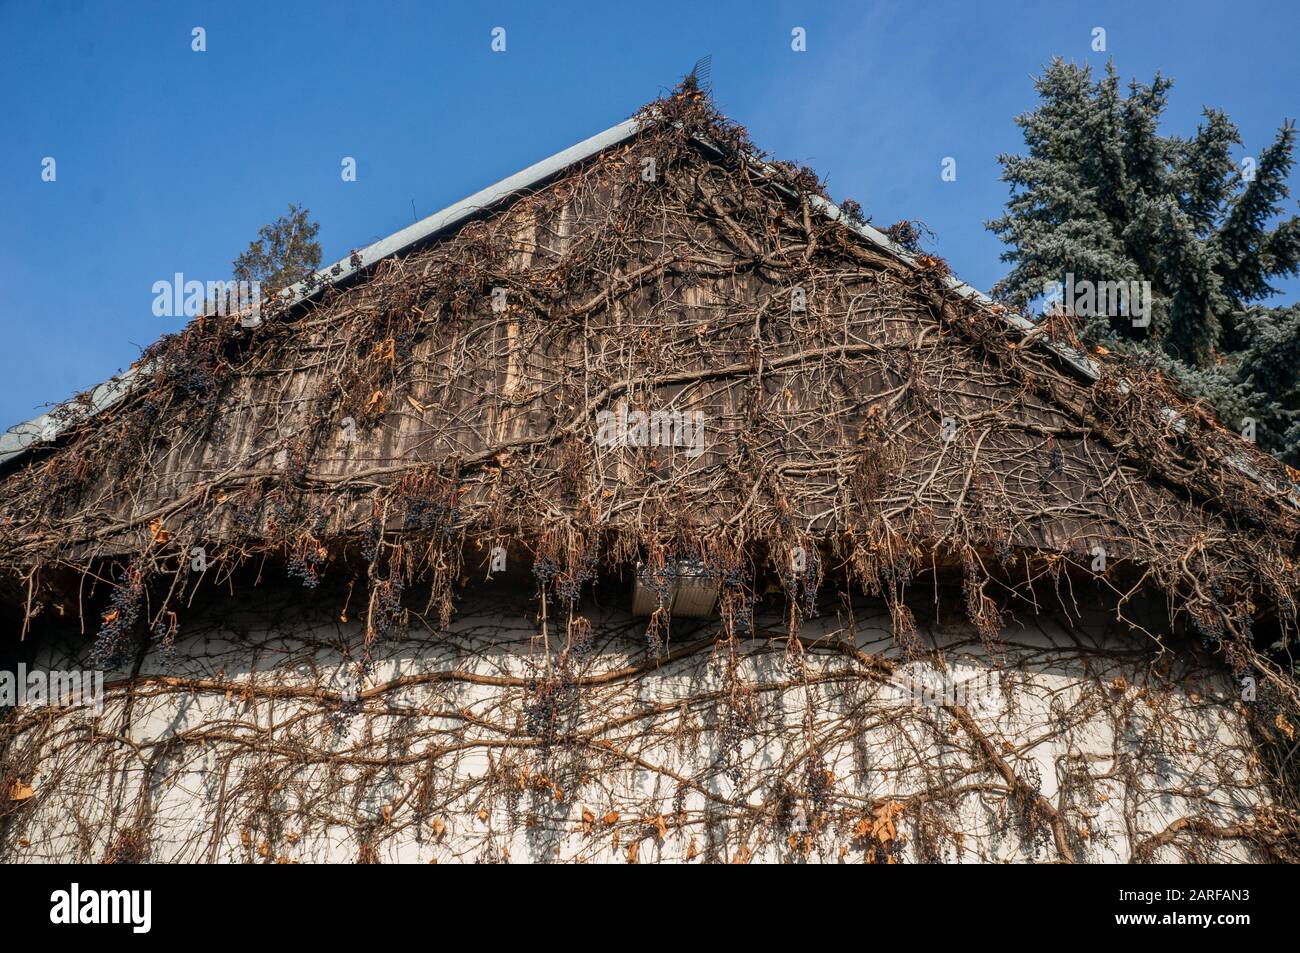 Overgrown vine plant with blue berries climbing the wall and roof of rustic stone house Stock Photo